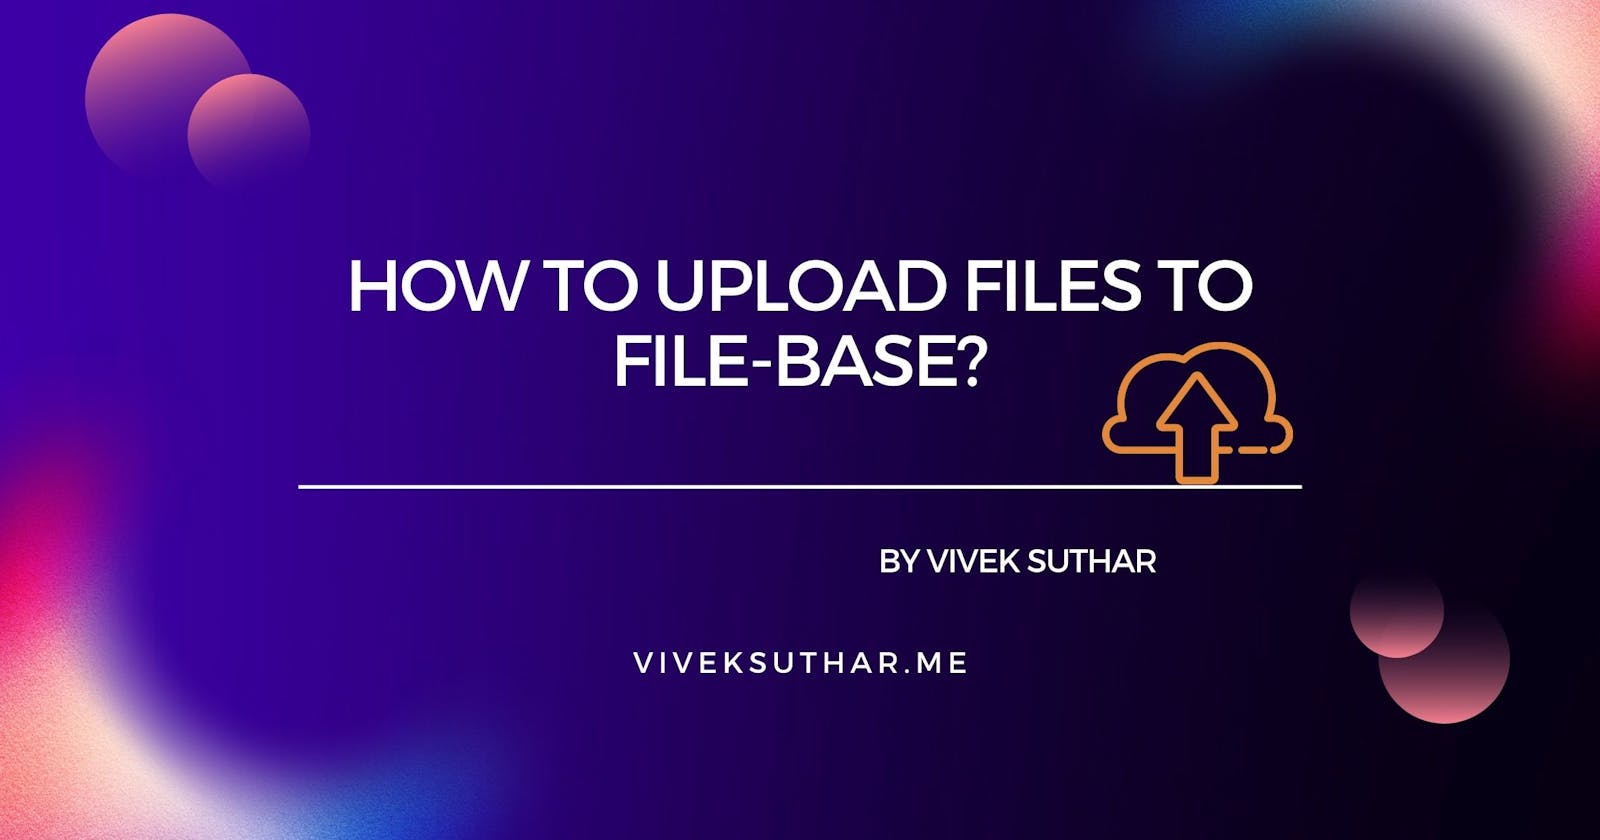 An easy guide on how to upload files to Filebase?